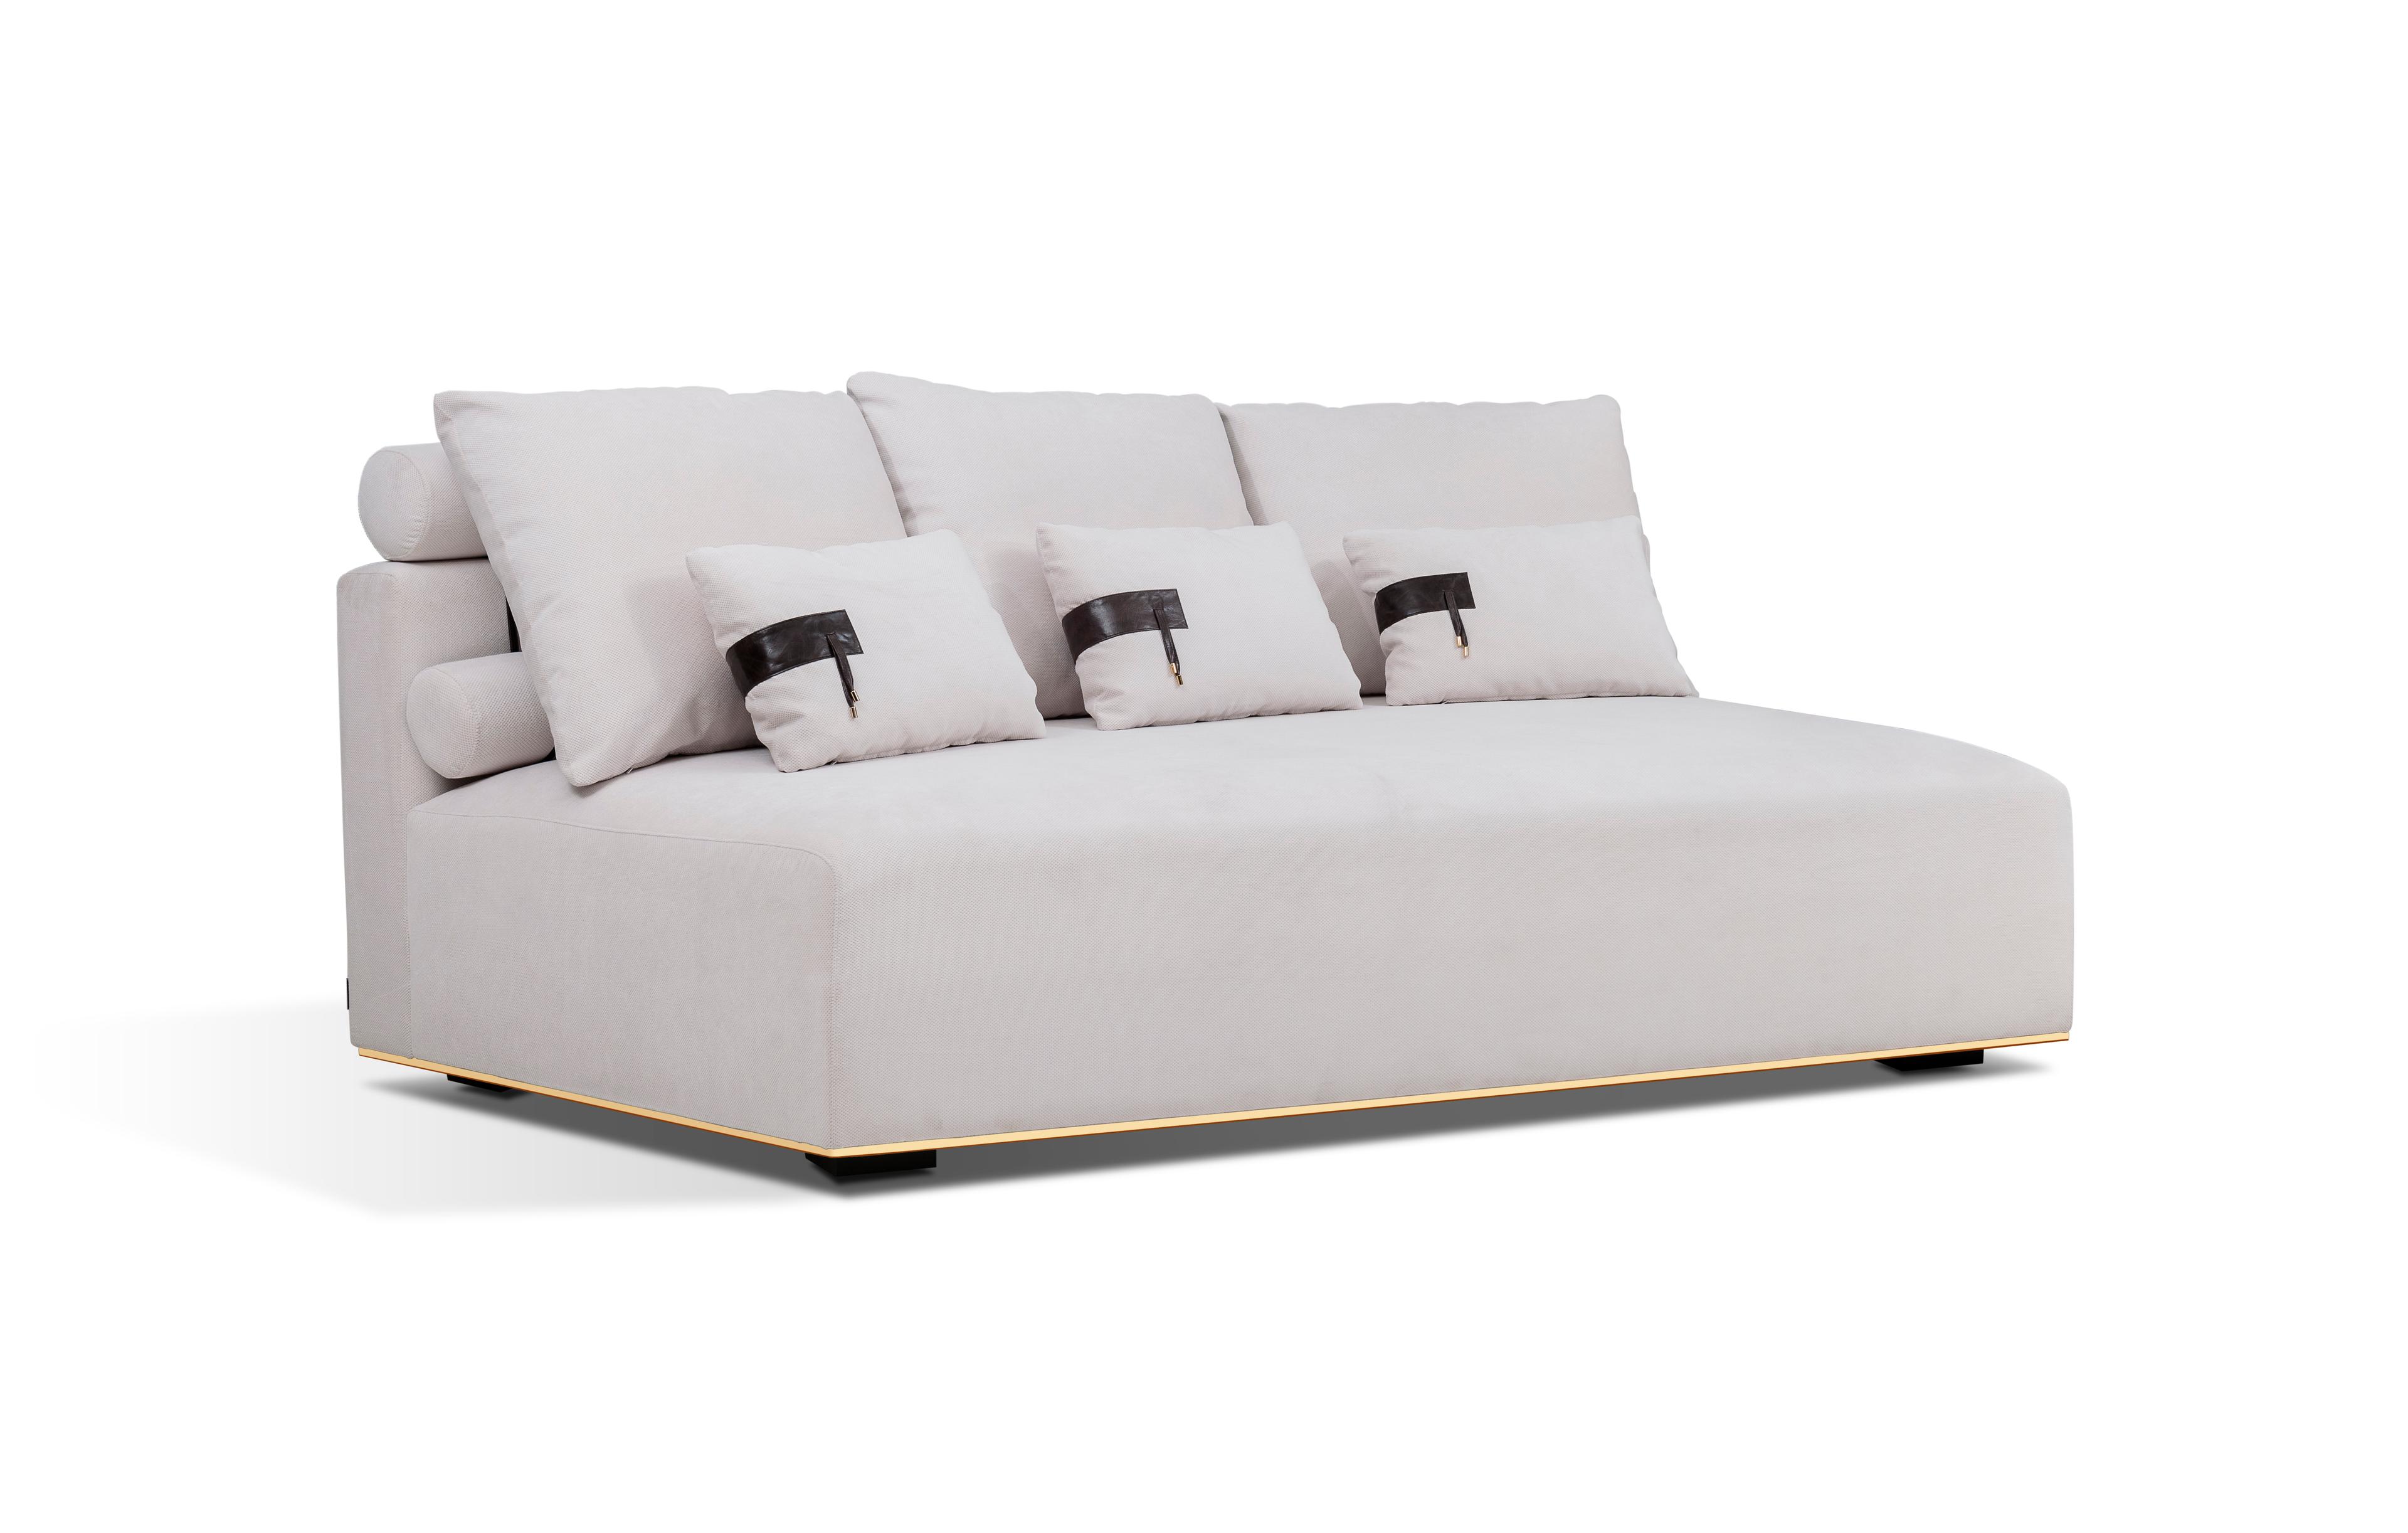 SINTRA COUPLE CHAISE